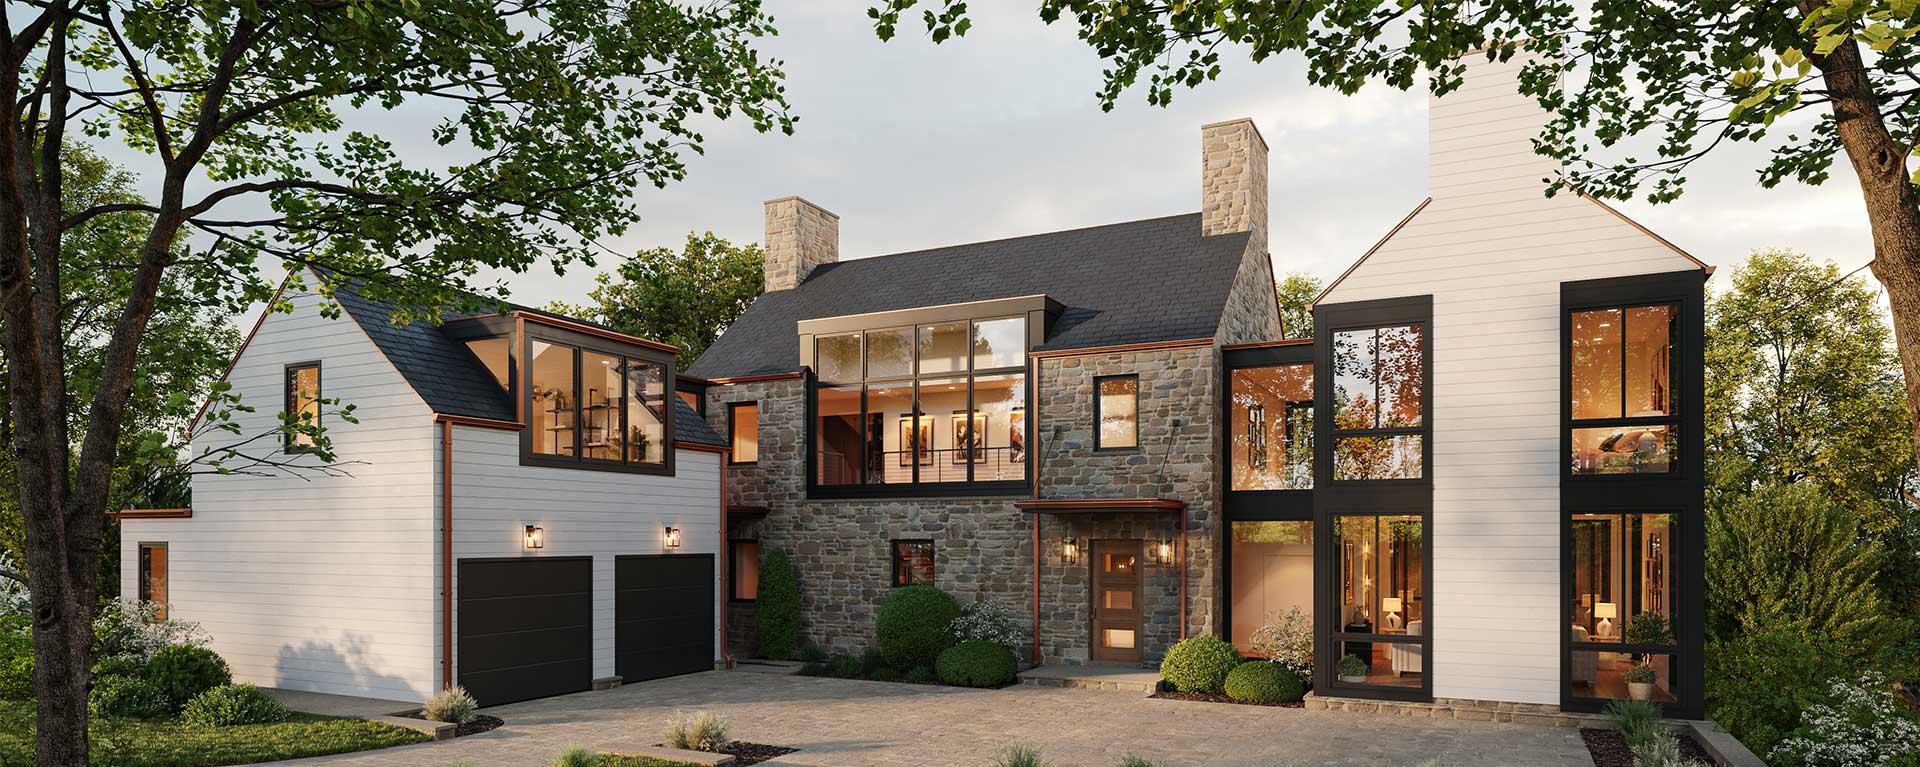 A custom home elevation in the contemporary cottage style, with natural elements of stone and copper mixed with modern design elements of large windows and block forms.